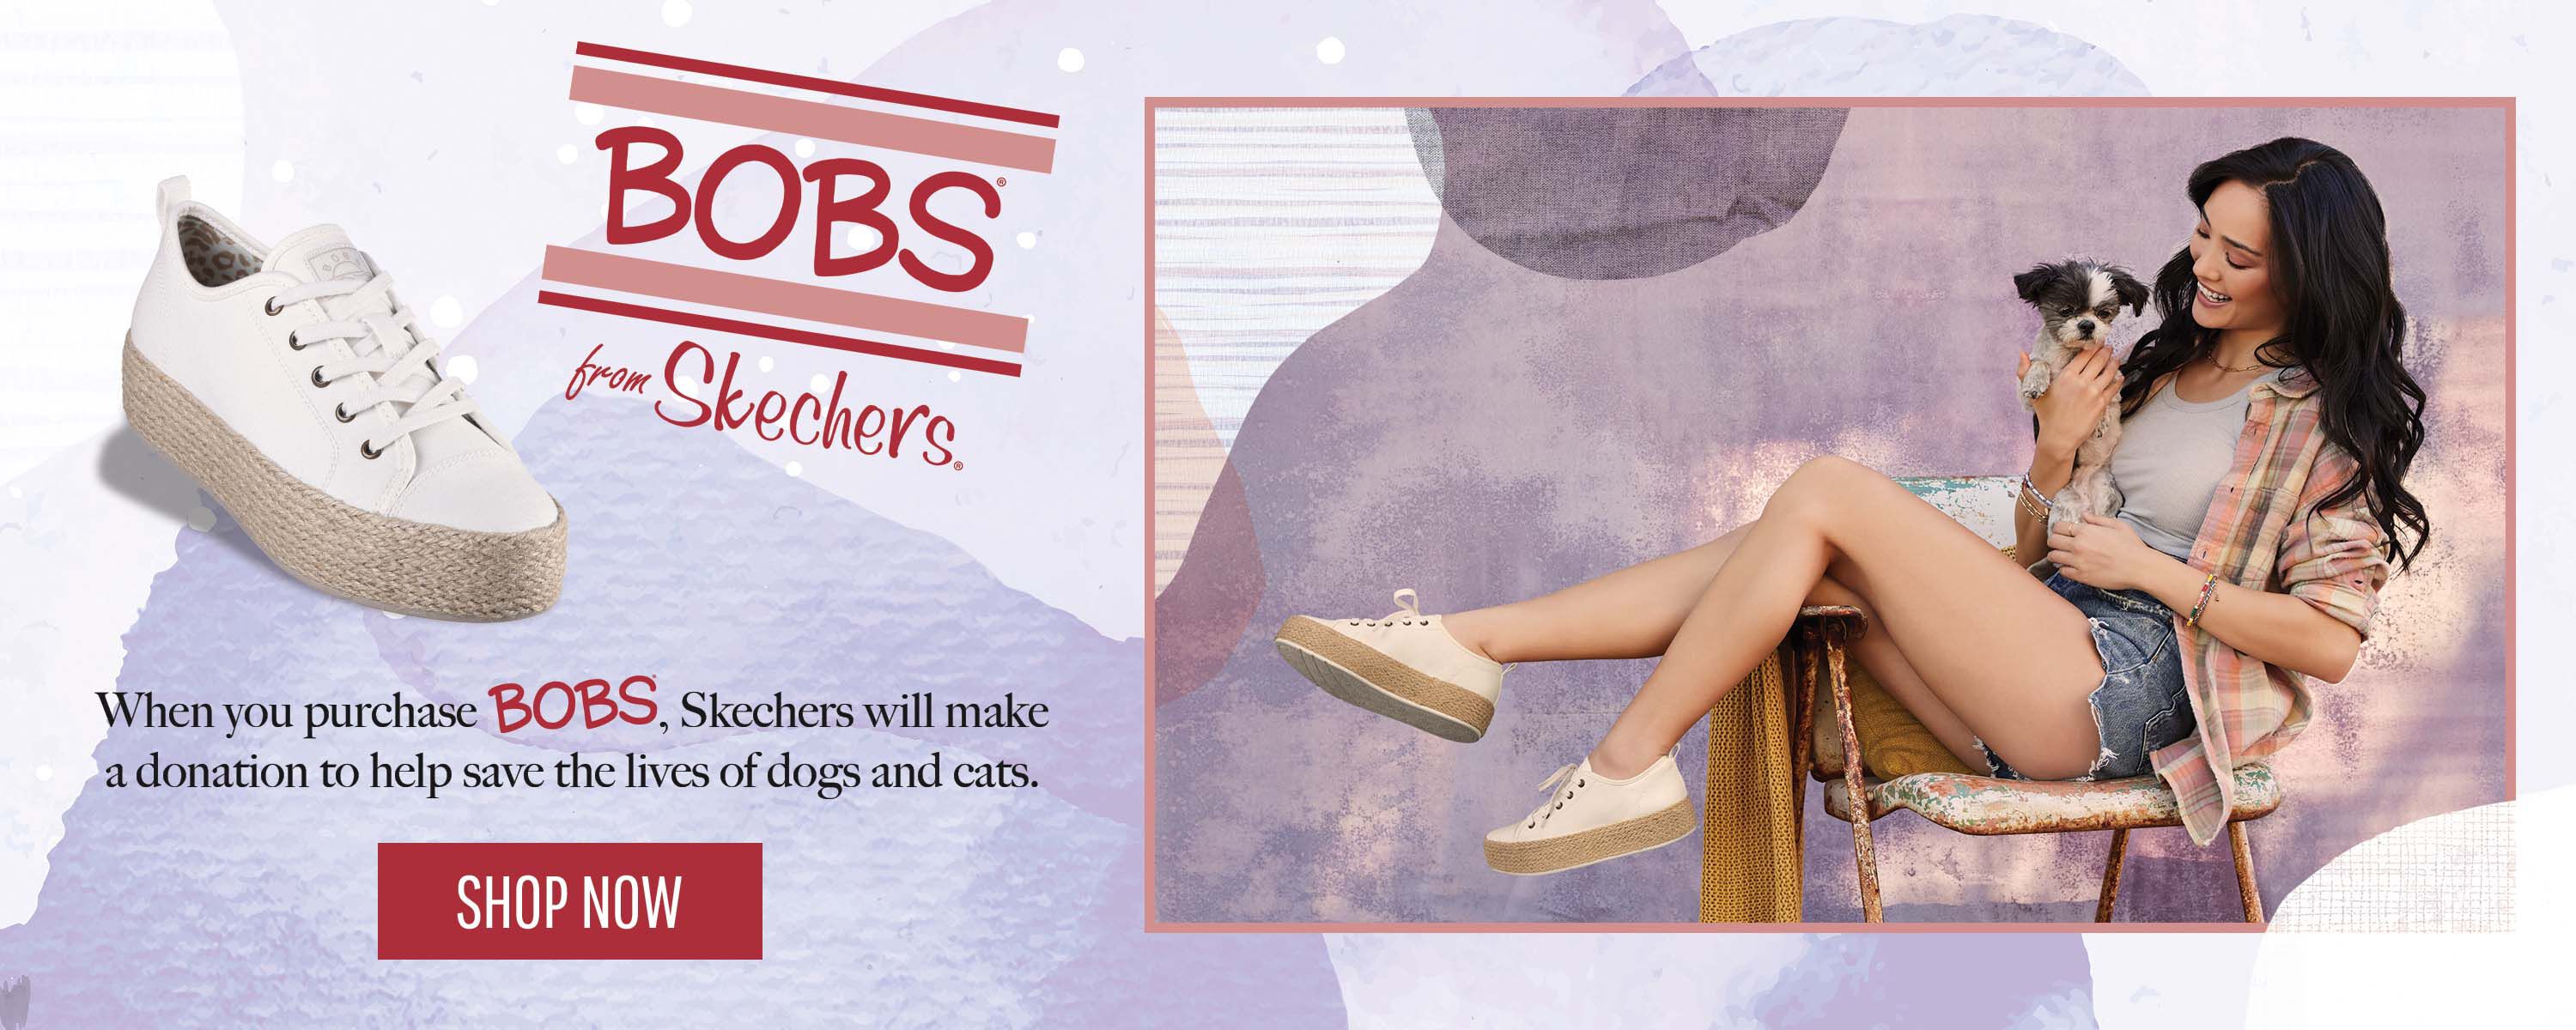 BOBS from Skechers - SHOP NOW